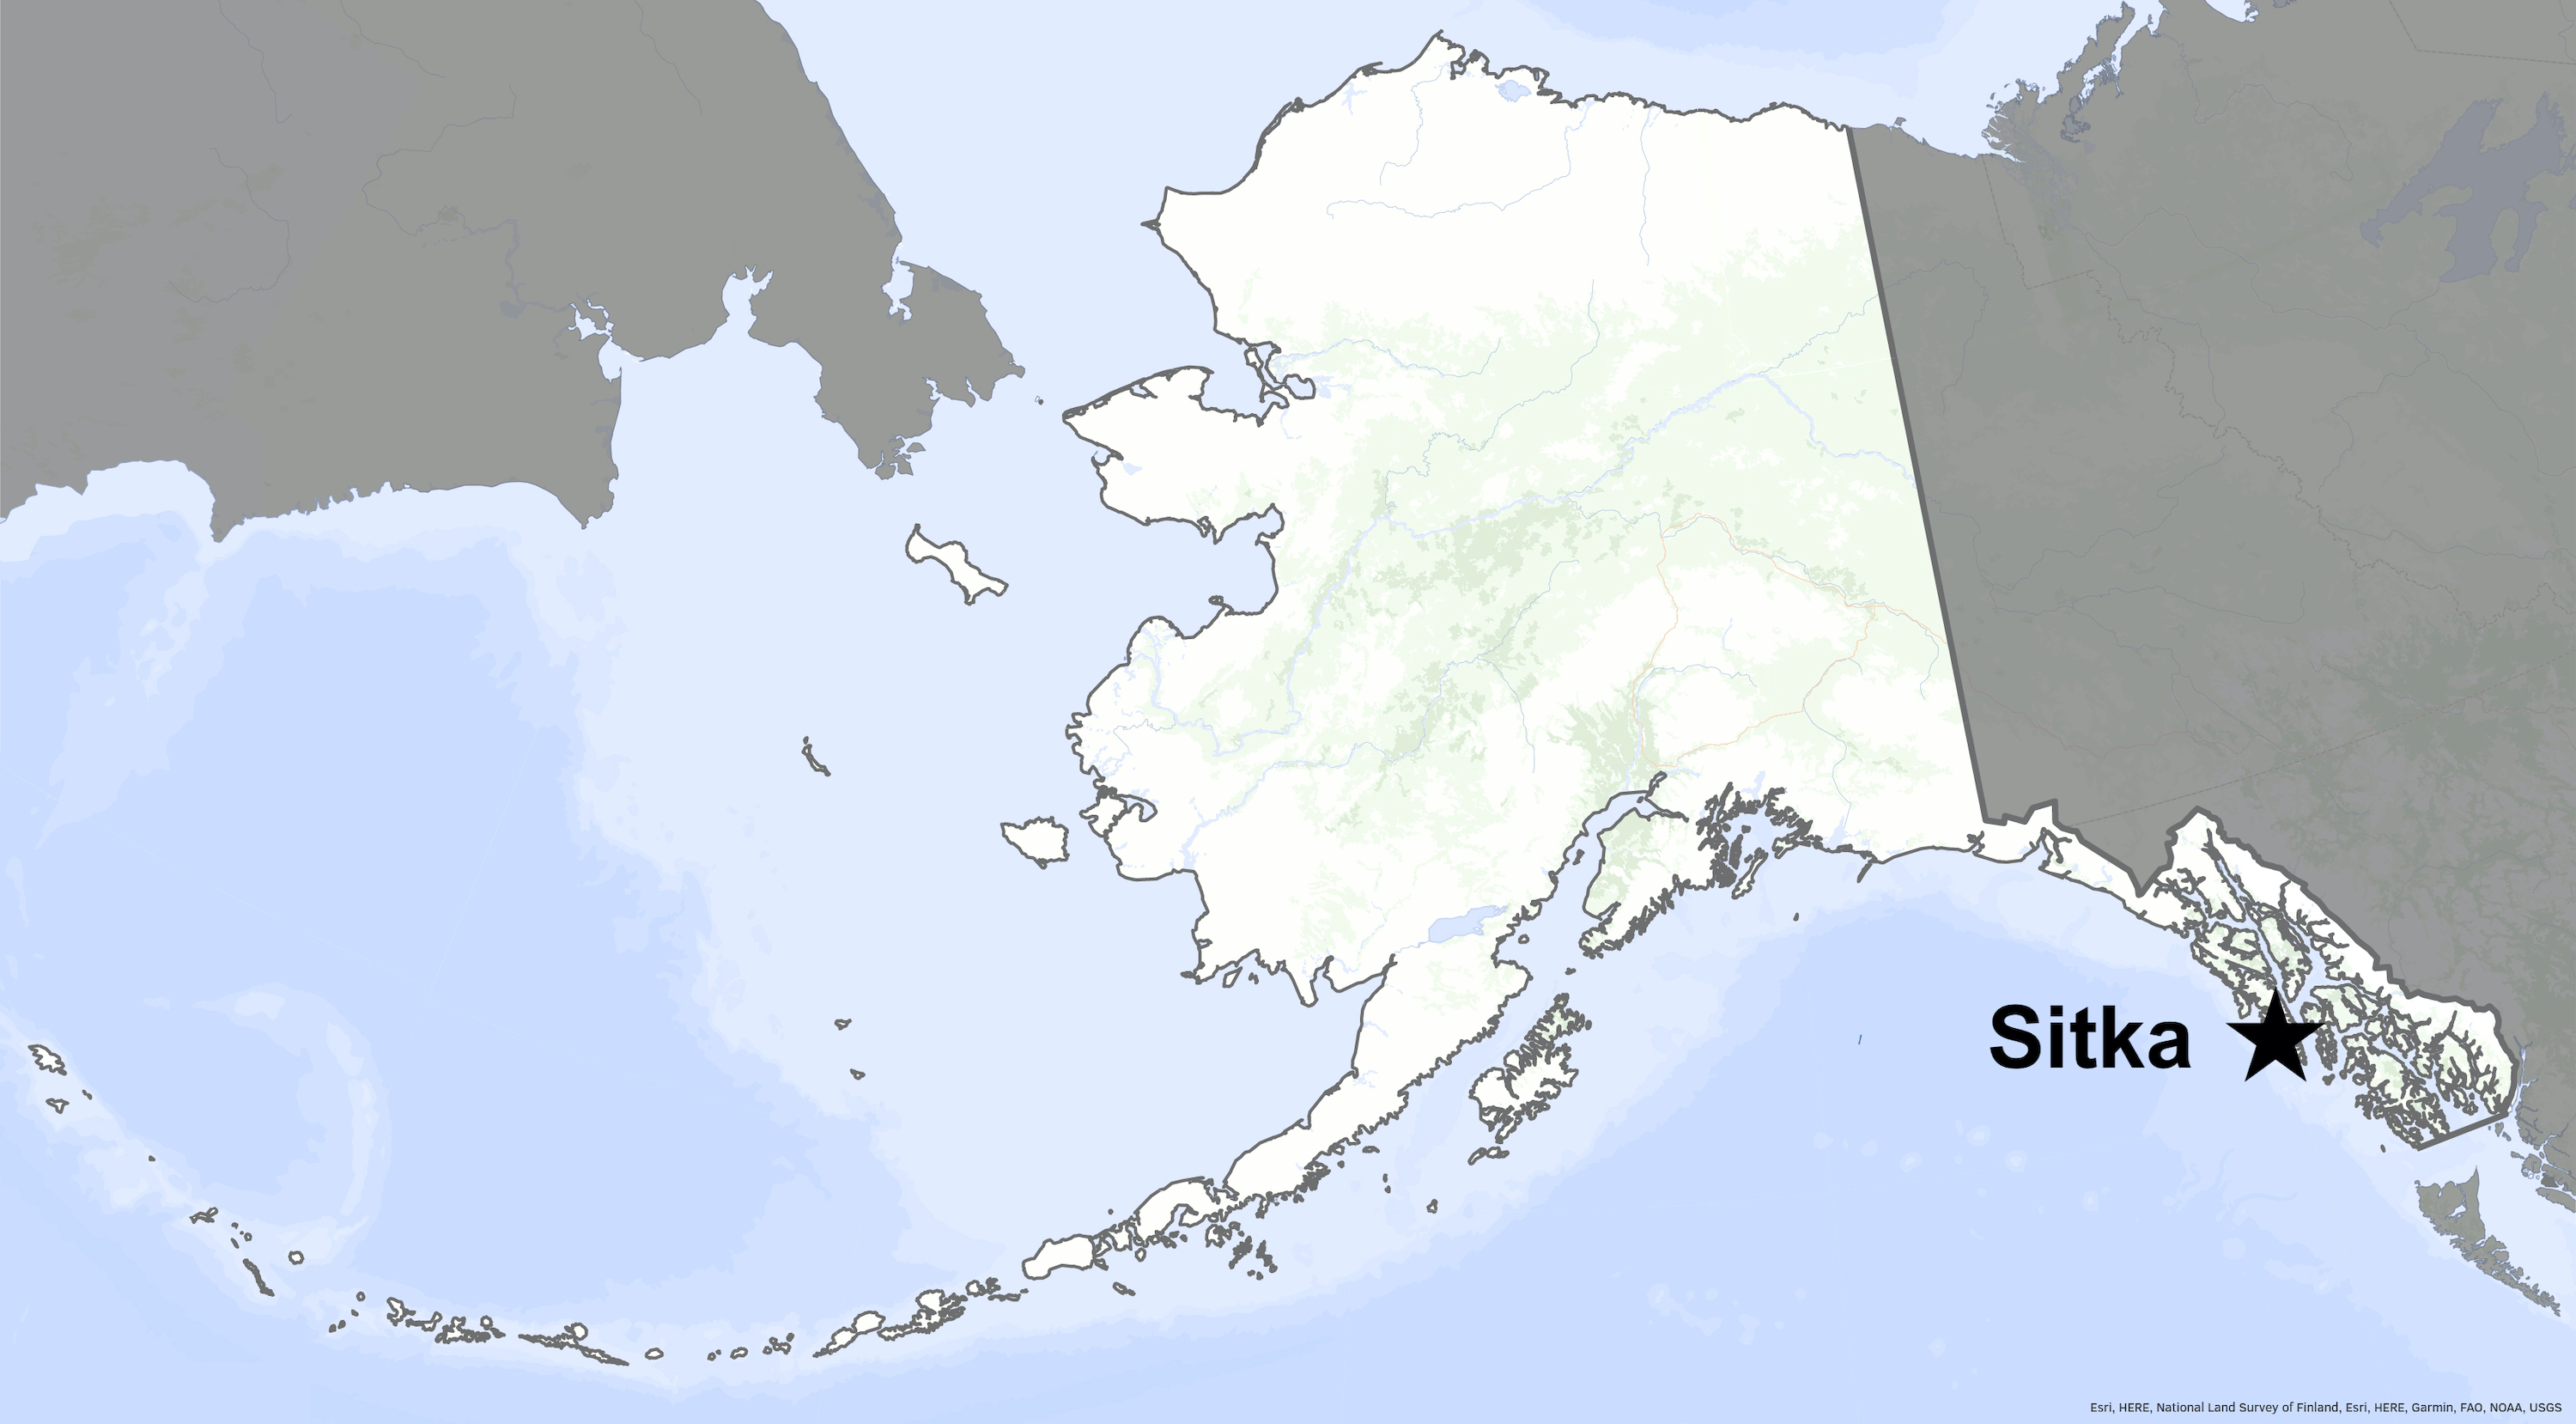 A star on a map shows the location of Sitka in Southeast Alaska.